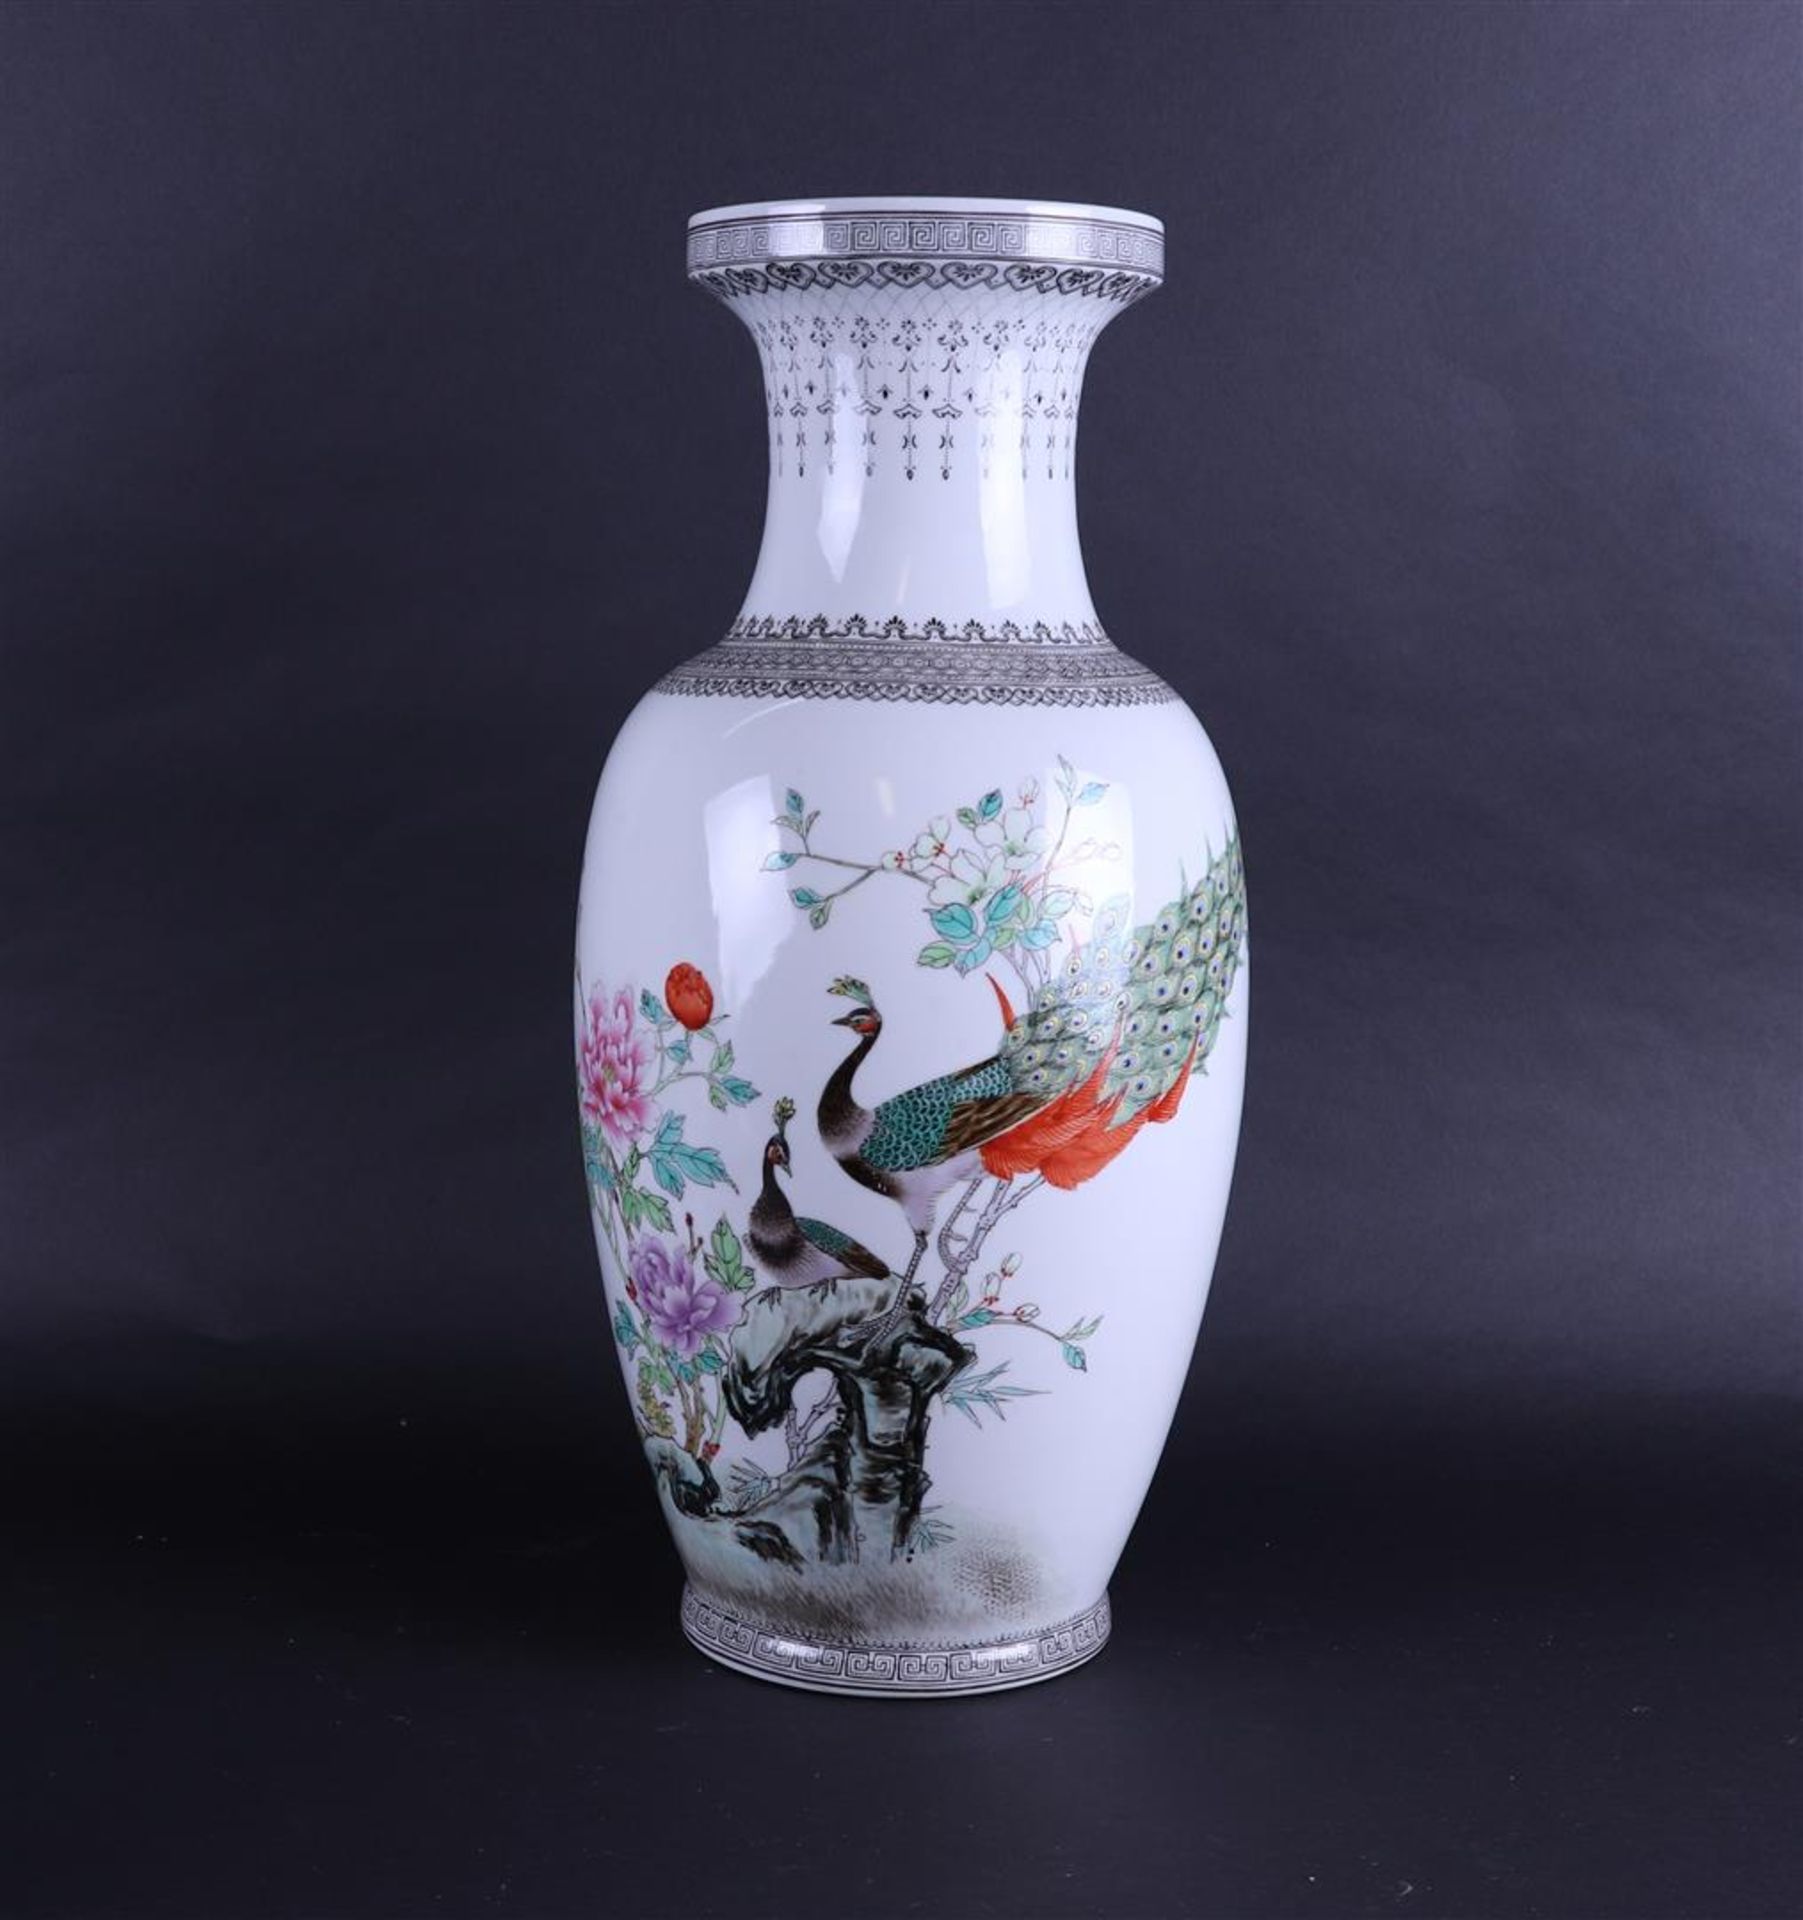 A large porcelain vase in Famile Rose decor with peacocks and flowers. China, 20th century.